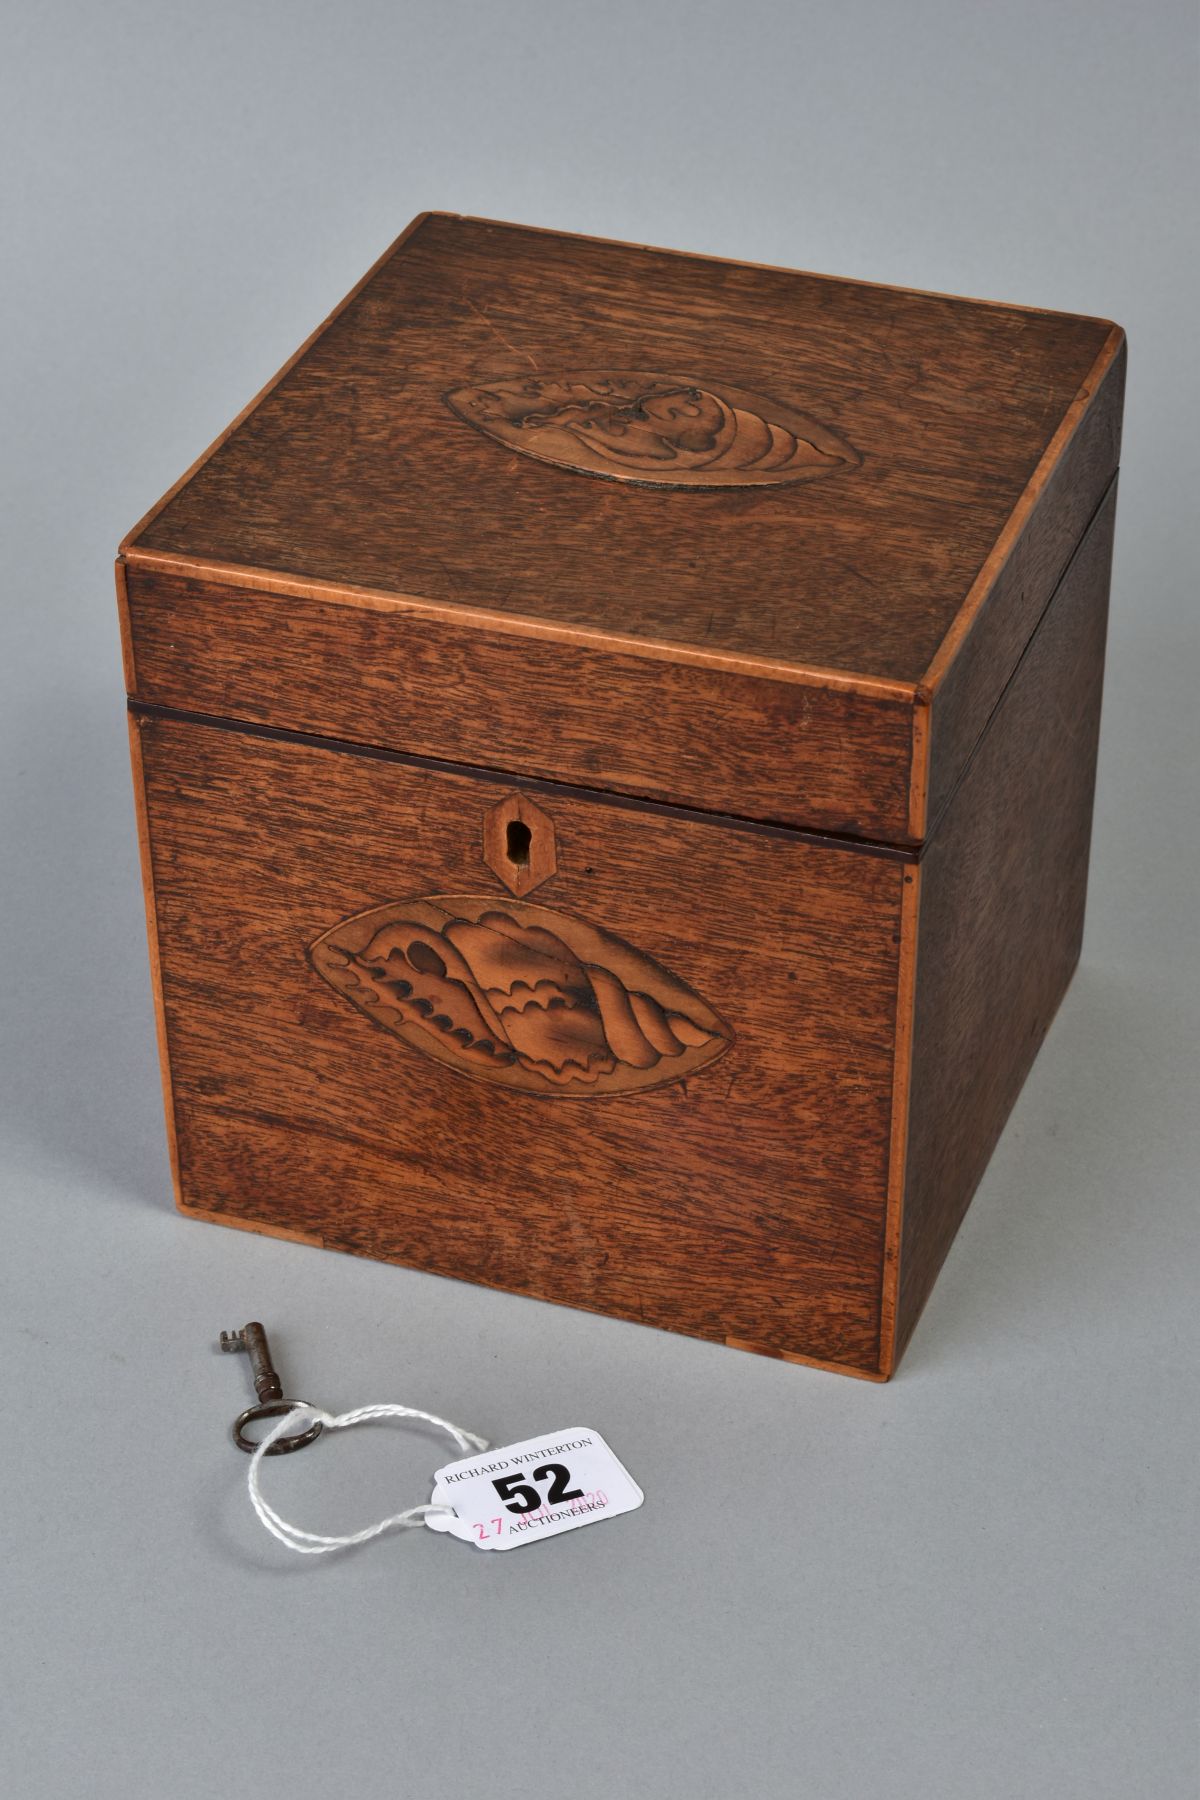 A GEORGE III MAHOGANY AND SATINWOOD INLAID TEA CADDY OF CUBE FORM, circa 1785, the hinged lid and